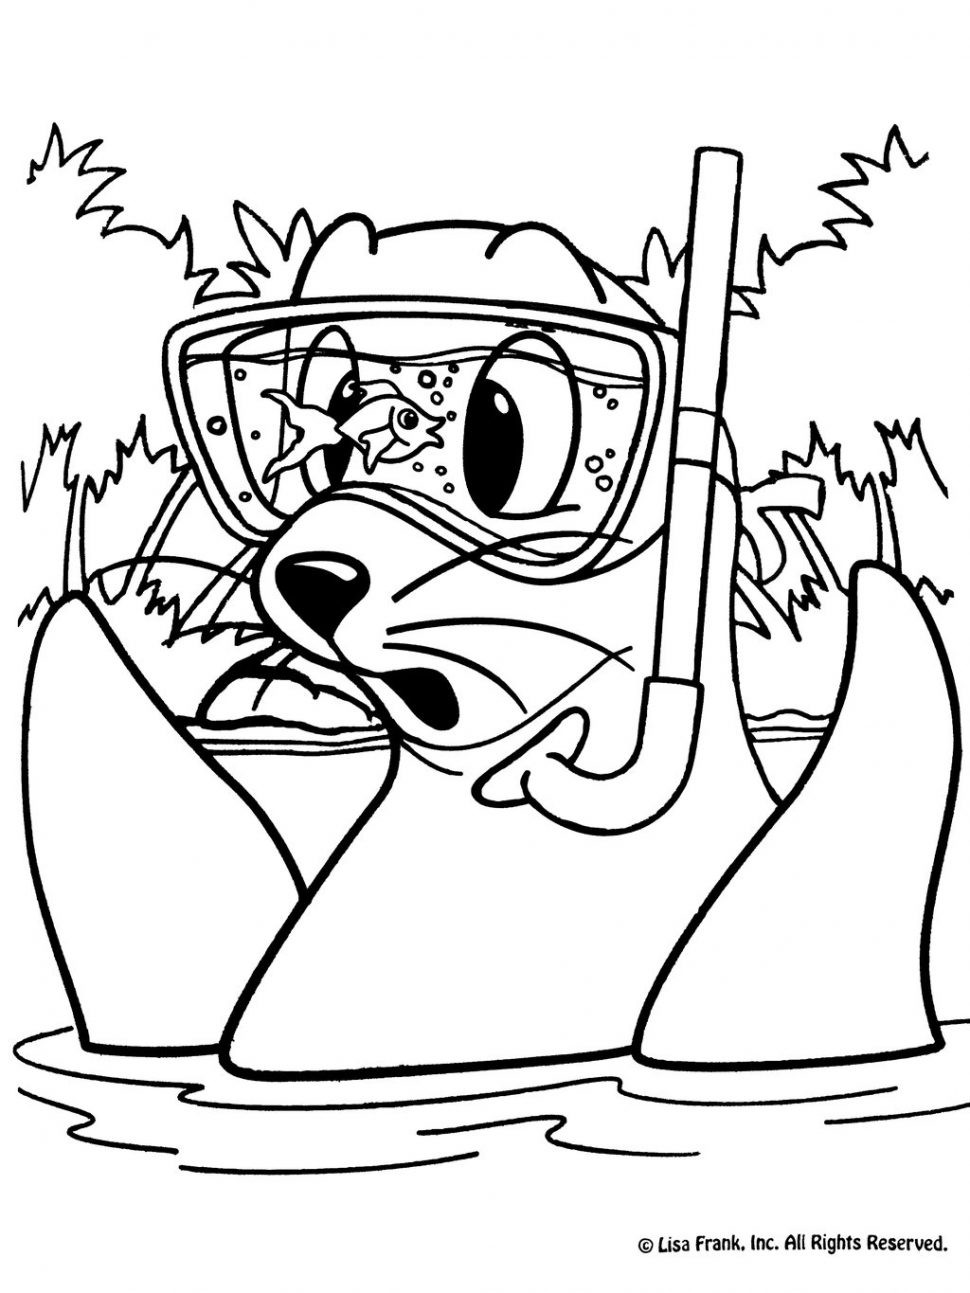 Coloring Pages To Color Online For Free
 Free line Coloring Pages For Kids Animals Books Amazon